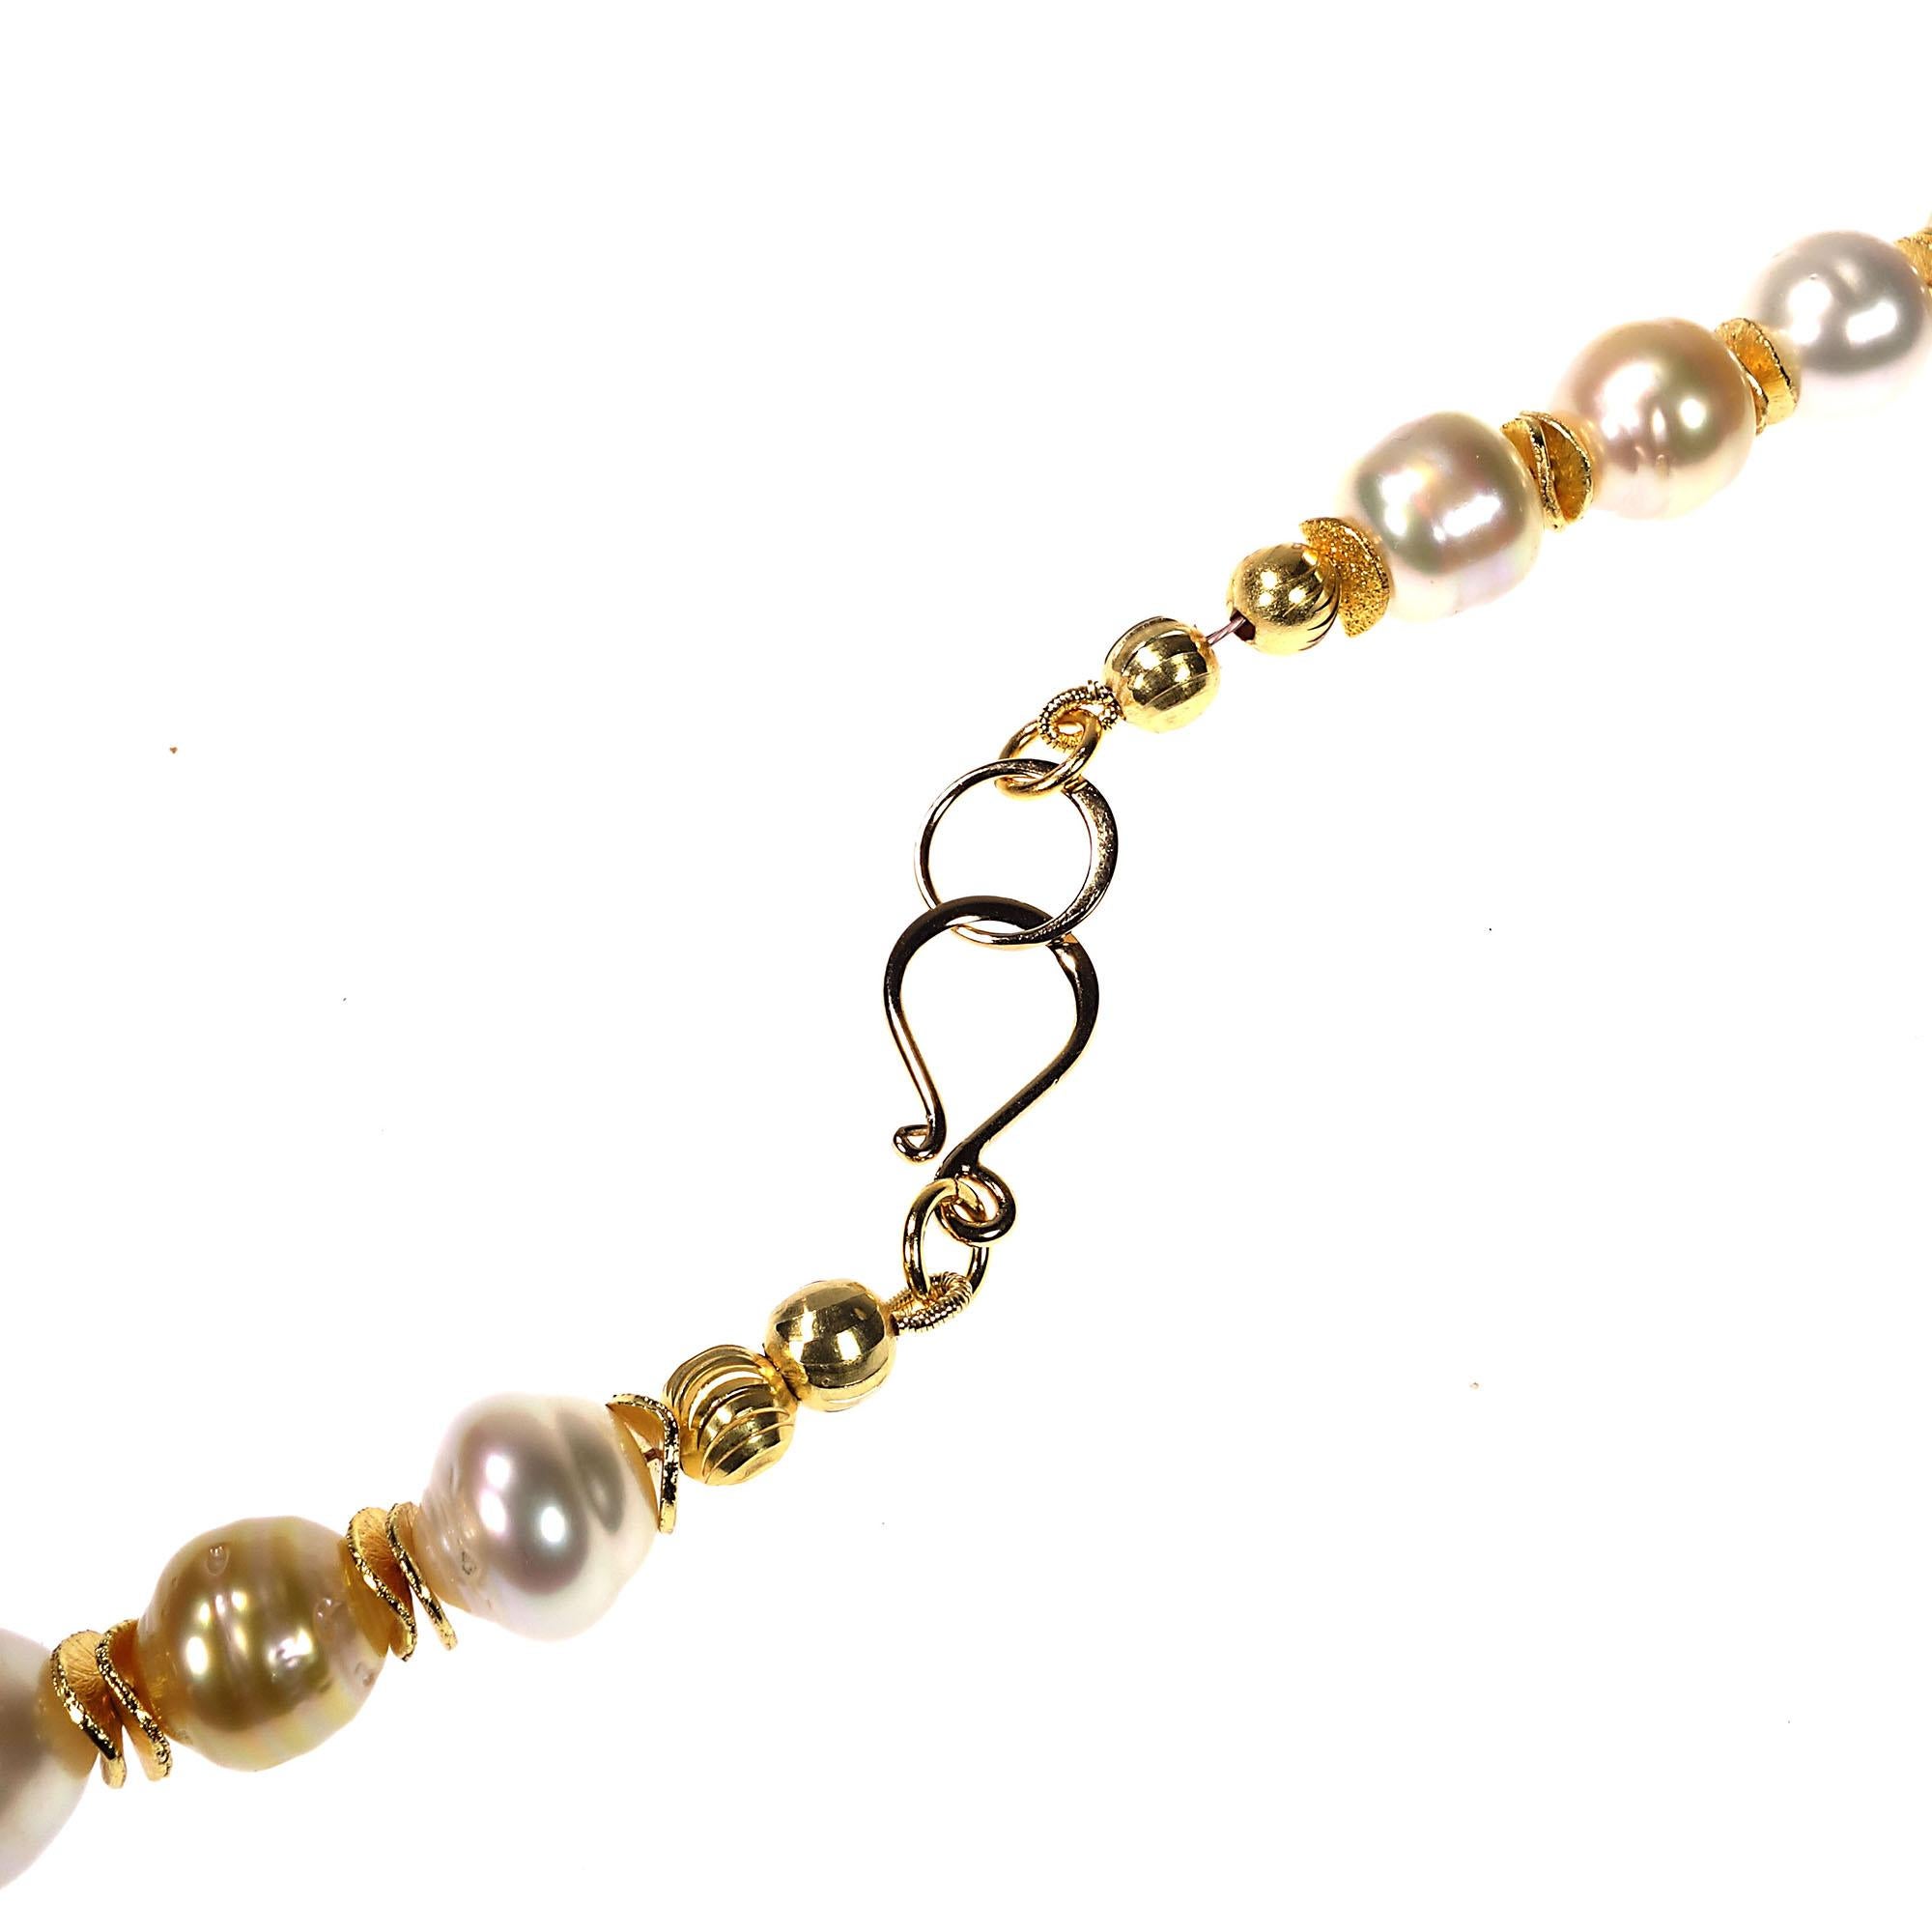 White and Gold Baroque Pearls with Gold Accents Necklace 3